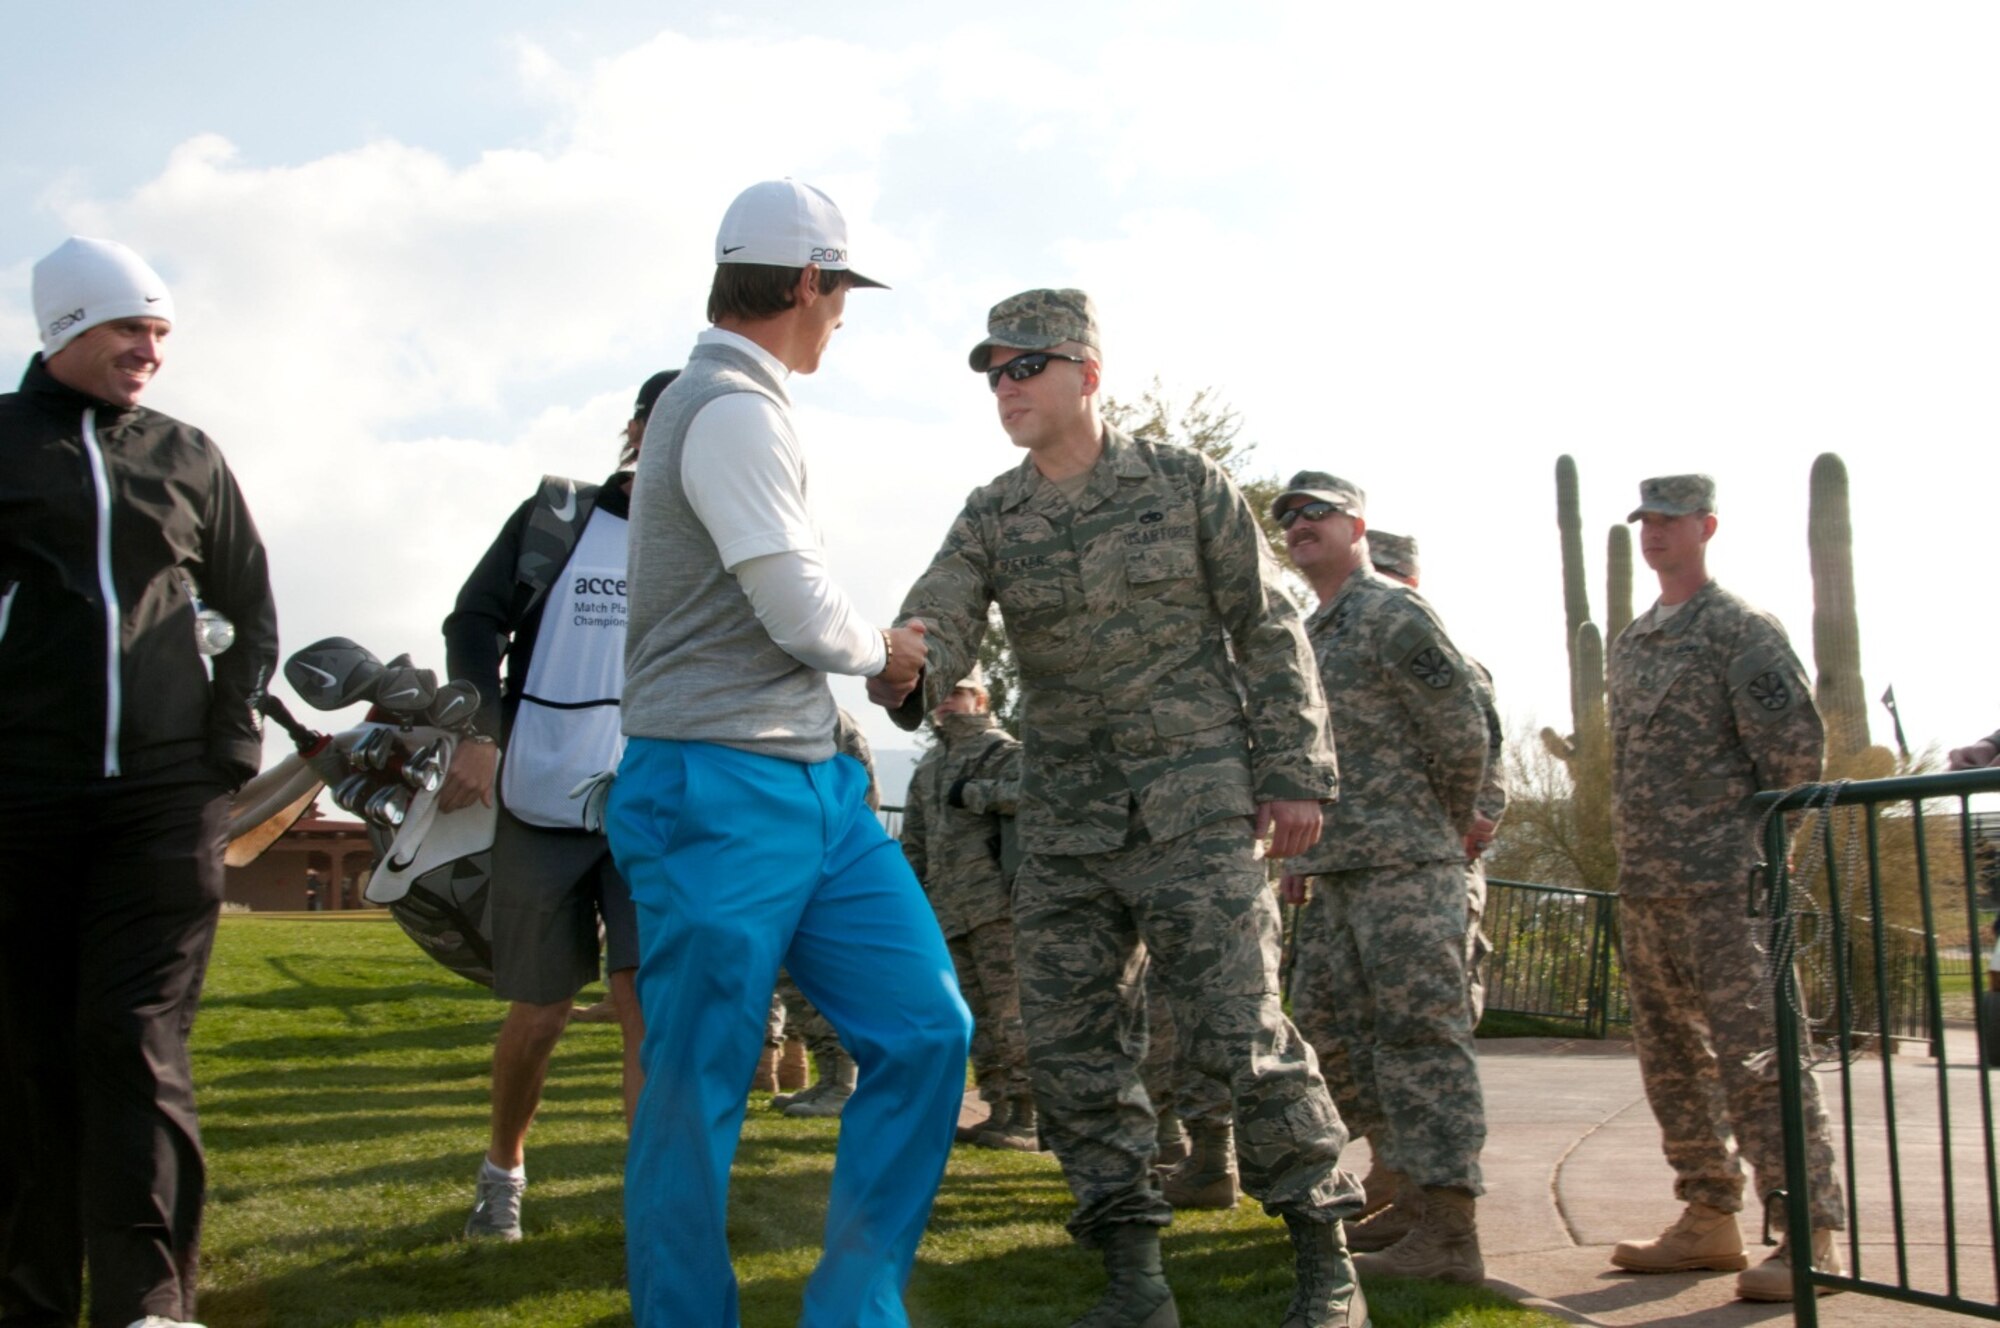 U.S. Air Force Staff Sgt. Ty Goeken, an Airman with the 162nd Fighter Wing, greets PGA Tour Thorbjorn Olesen as he makes his way to the first tee of the day at the Accenture Match Play Championship, held at the Golf Club at Dove Mountain in Marana, Ariz., Feb. 22.  Air and Army National Guardsmen from the 162nd Fighter Wing and the 285th Attack Reconnaissance Battalion in Tucson, Ariz. lined the walkway to the first hole to greet golfers before the beginning of play. (U.S. Air Force photo by Tech. Sgt. Hollie A. Hansen/Released)